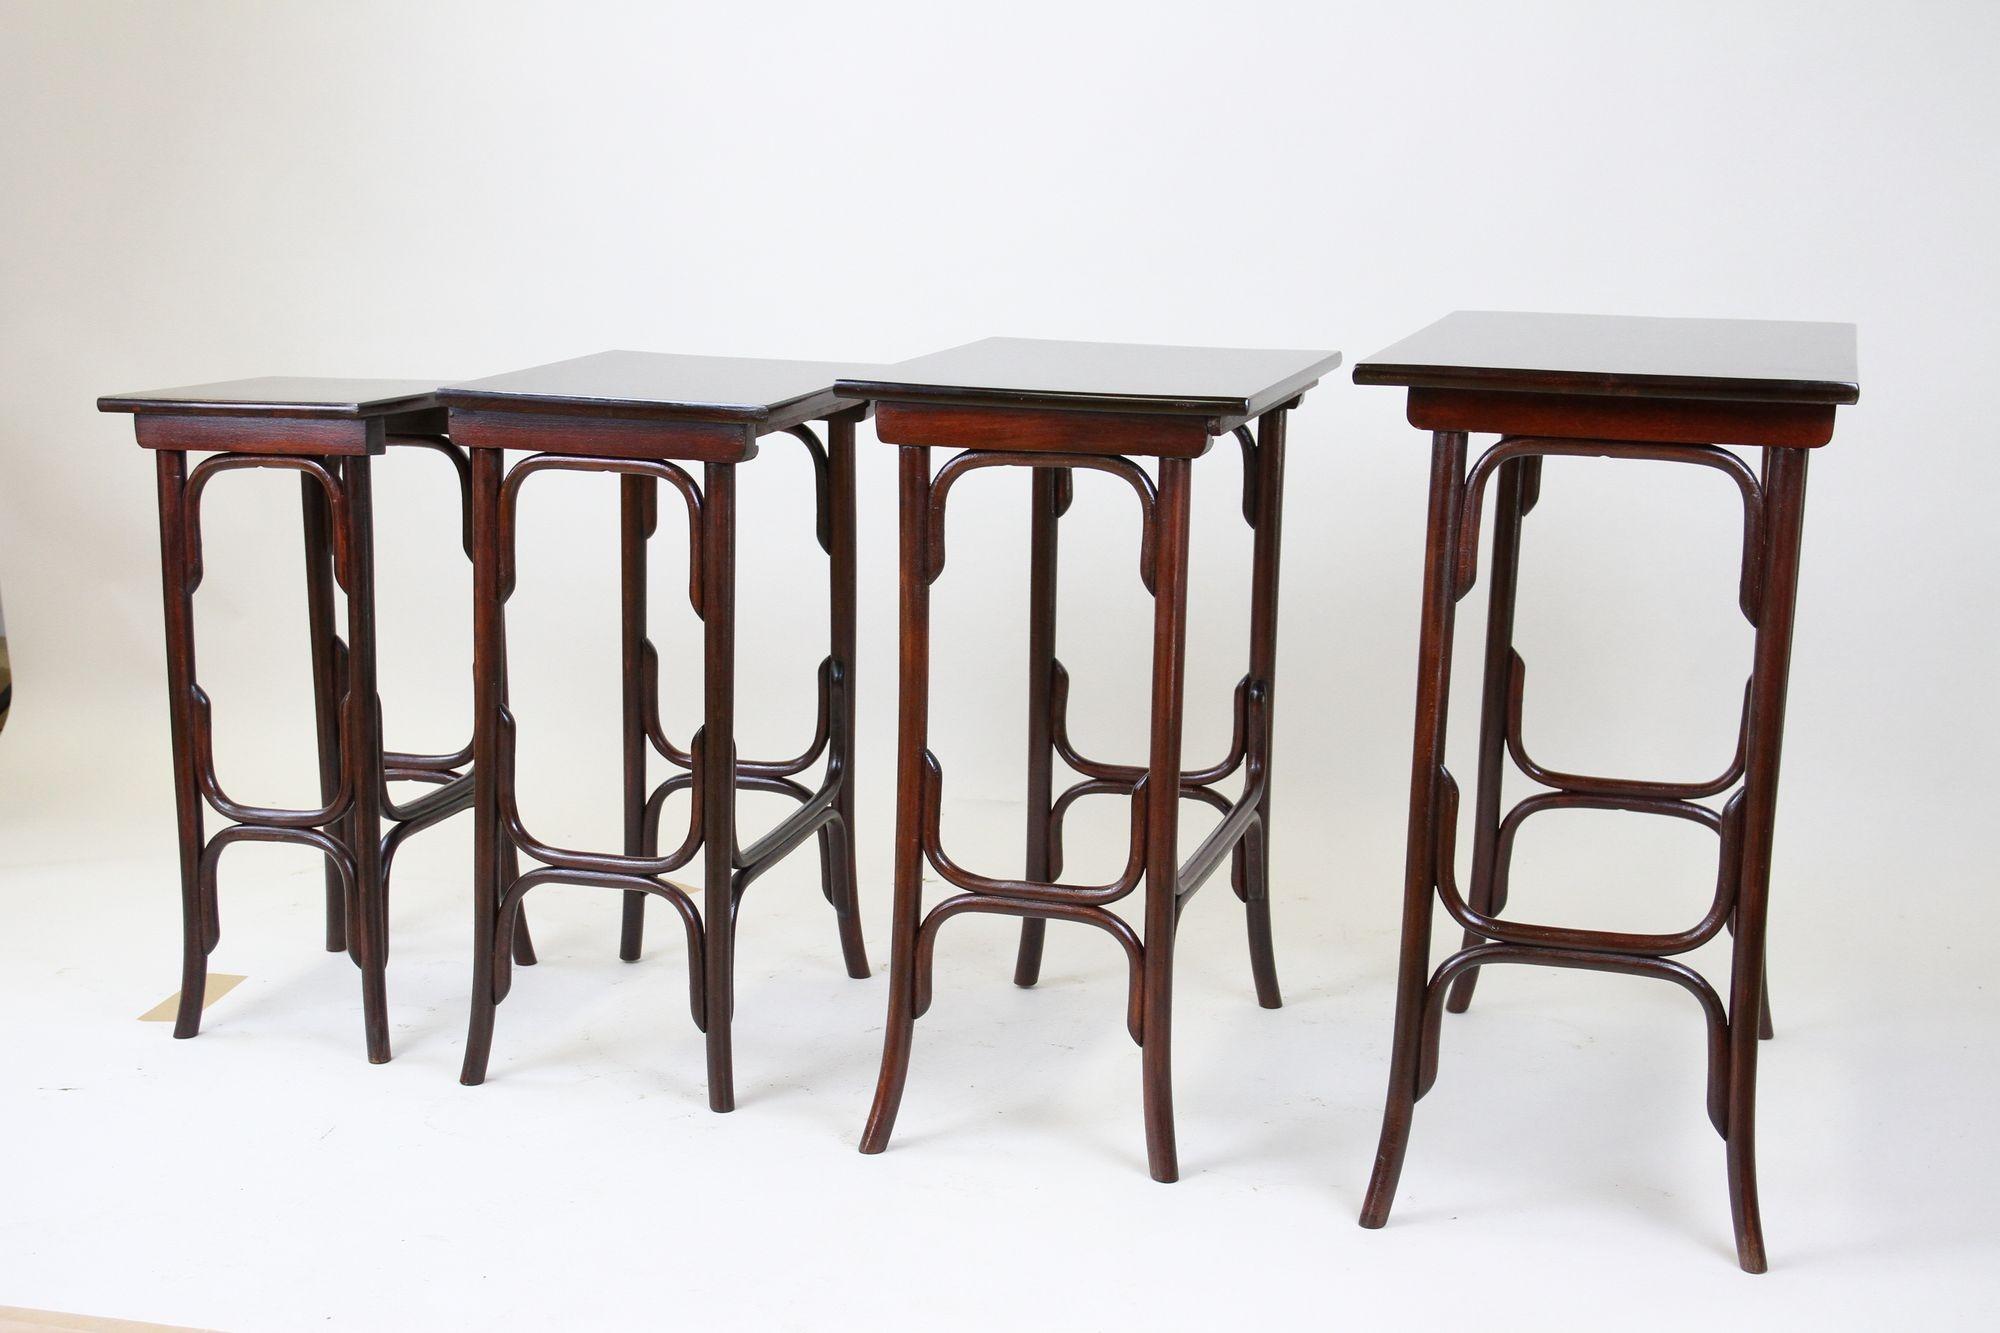 Art Nouveau Bentwood Nesting Tables by Thonet, Marked, Austria circa 1905 For Sale 6